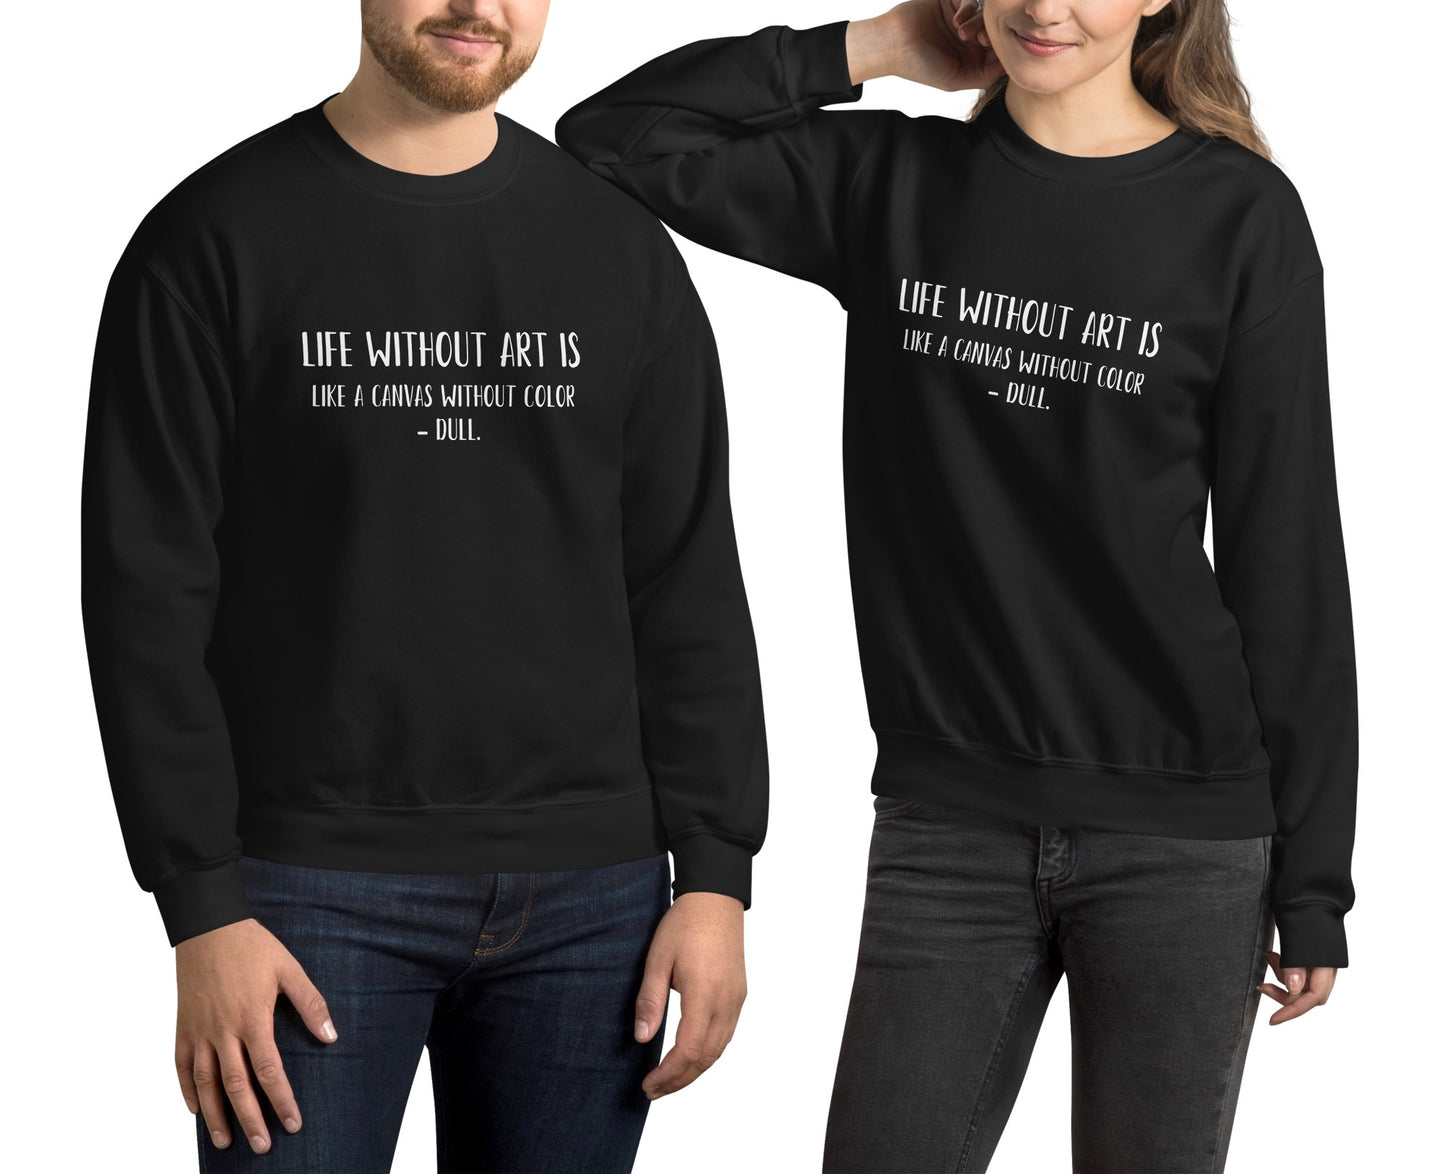 “Life without art is like a canvas without color - Dull.” - Unisex Sweatshirt